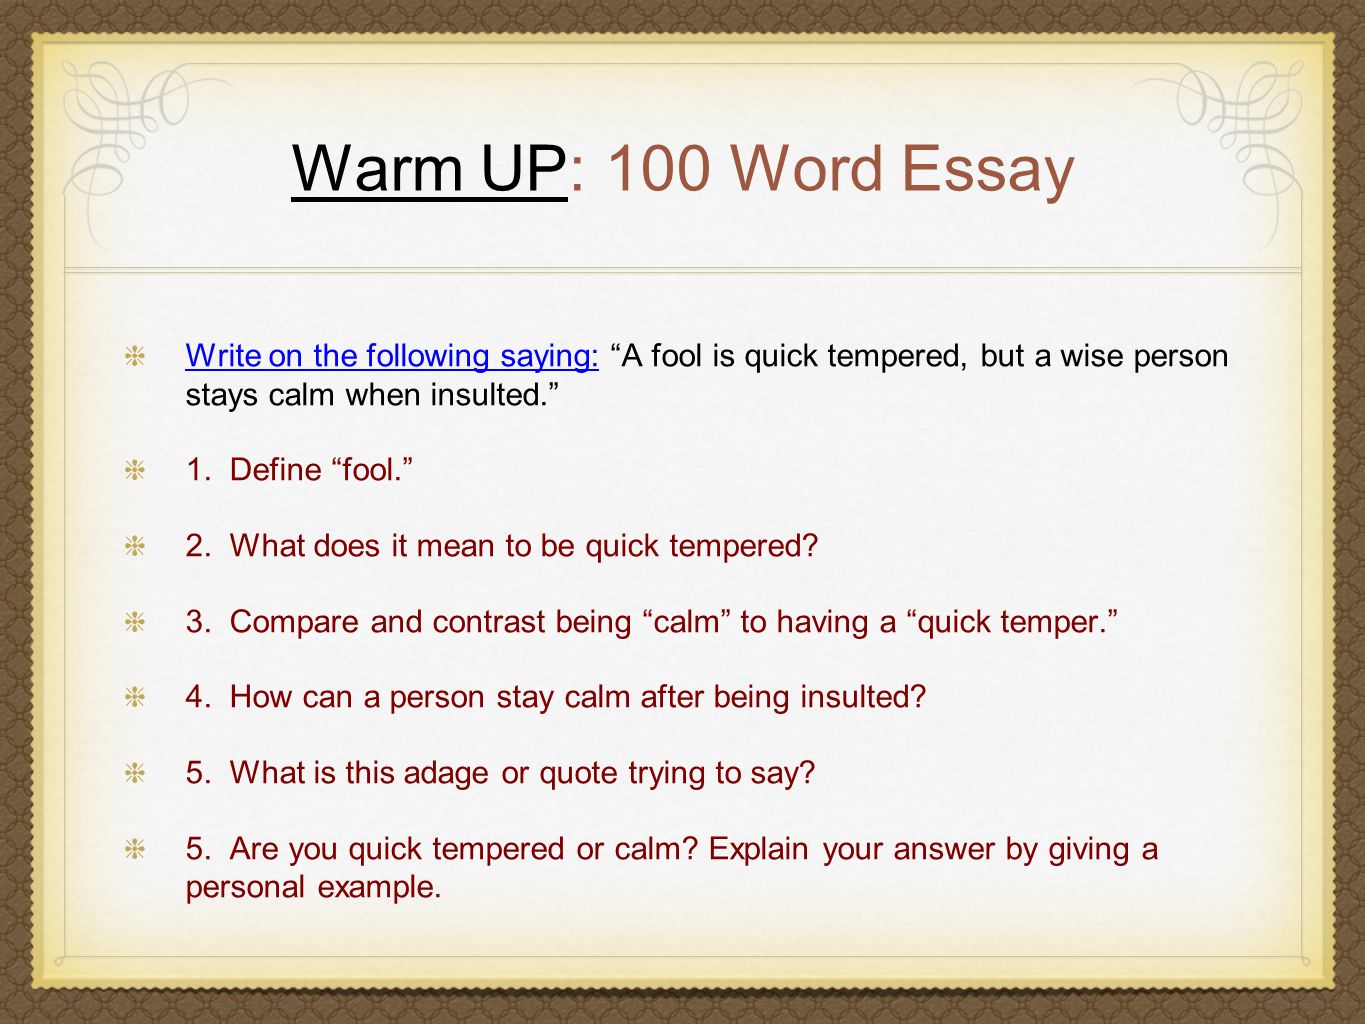 Welcome to Essay Writer